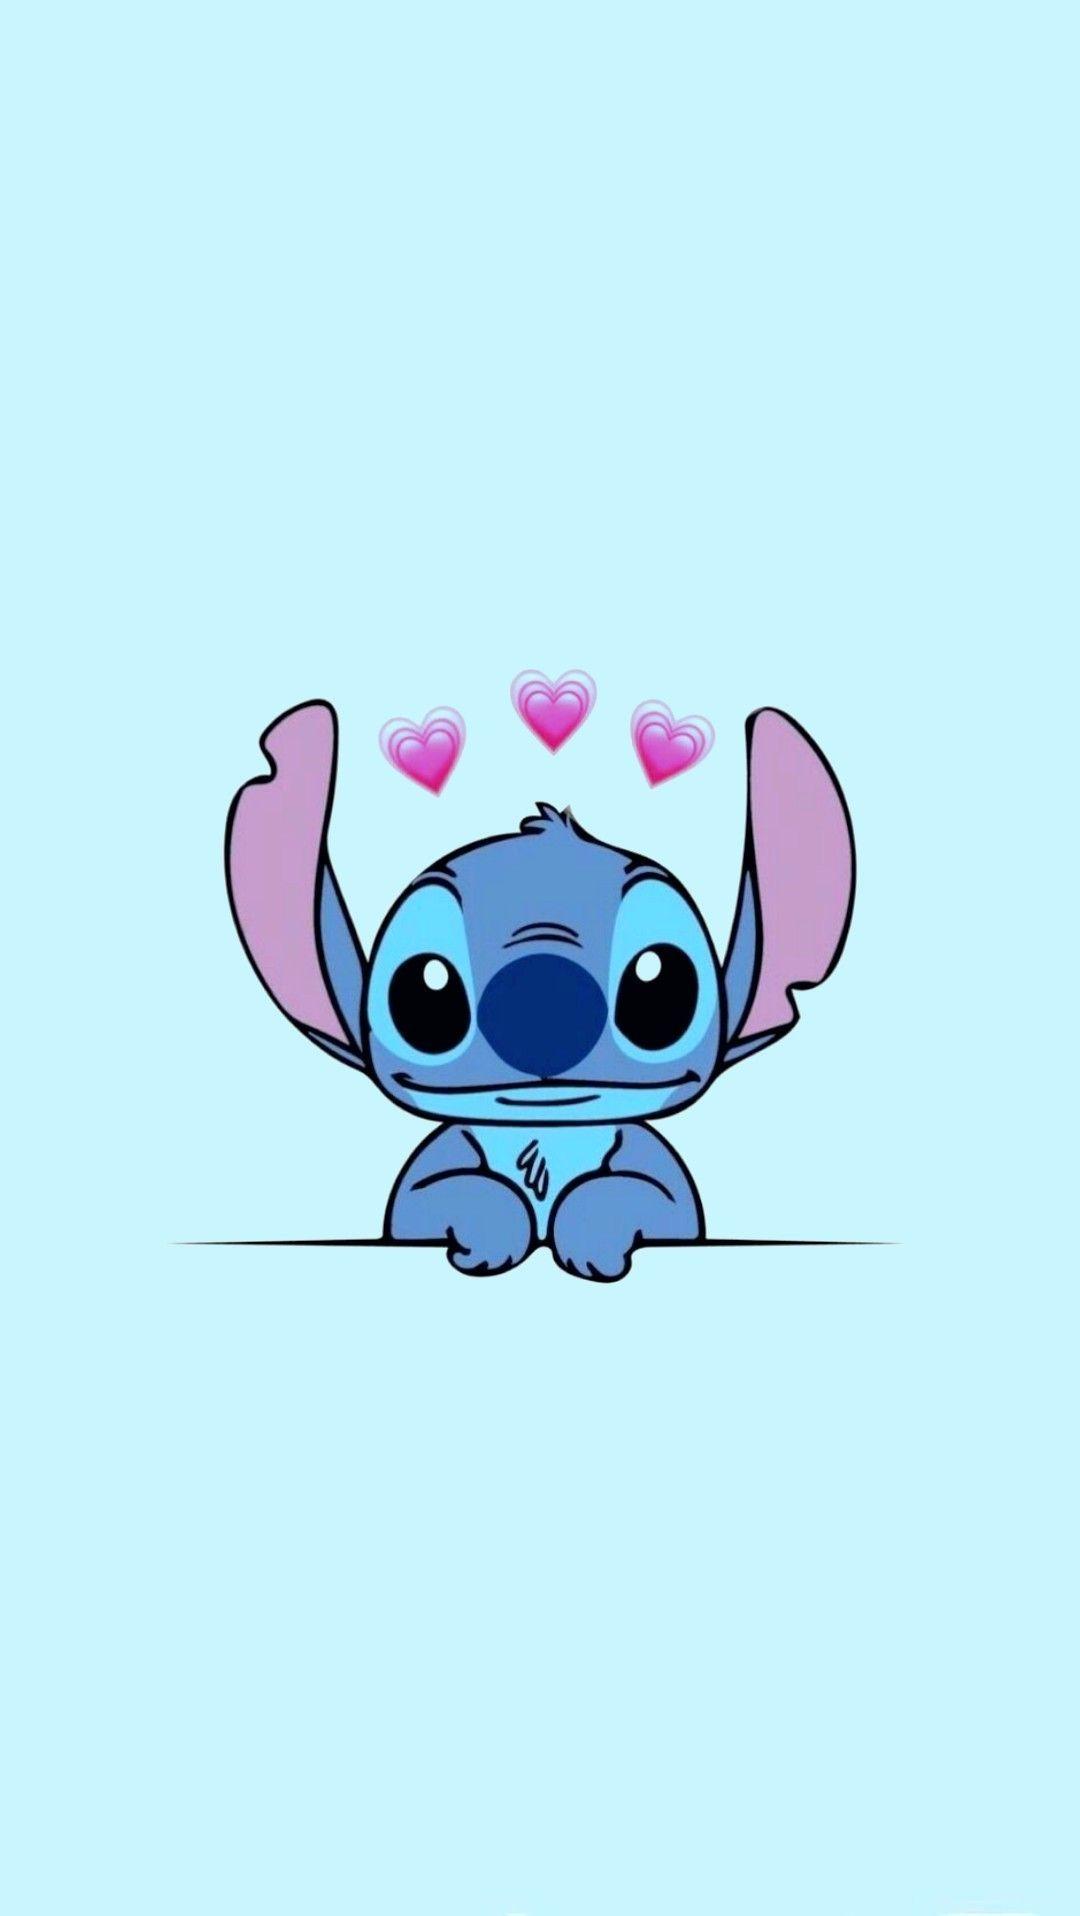 Stitch Lovers  Stitch Lovers added a new photo